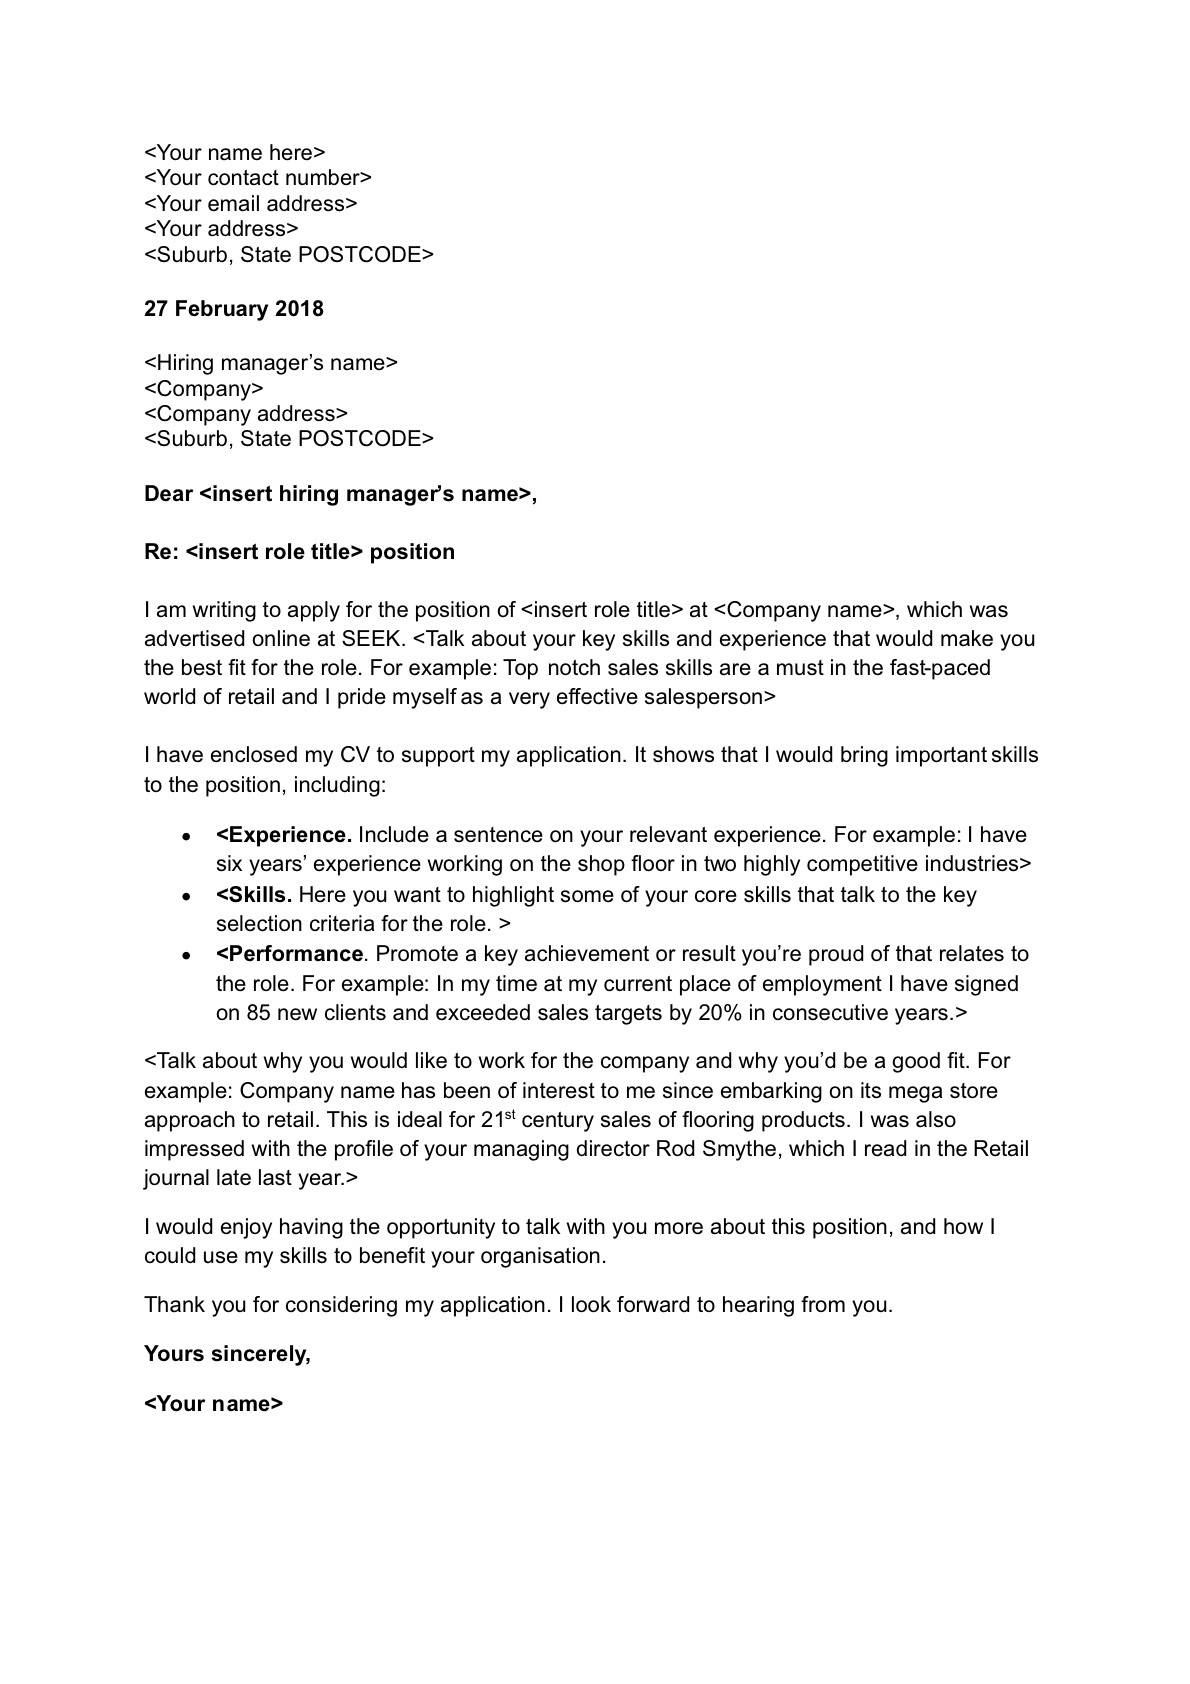 The Best Cover Letter Examples from seekconz.corewebdna.net.au